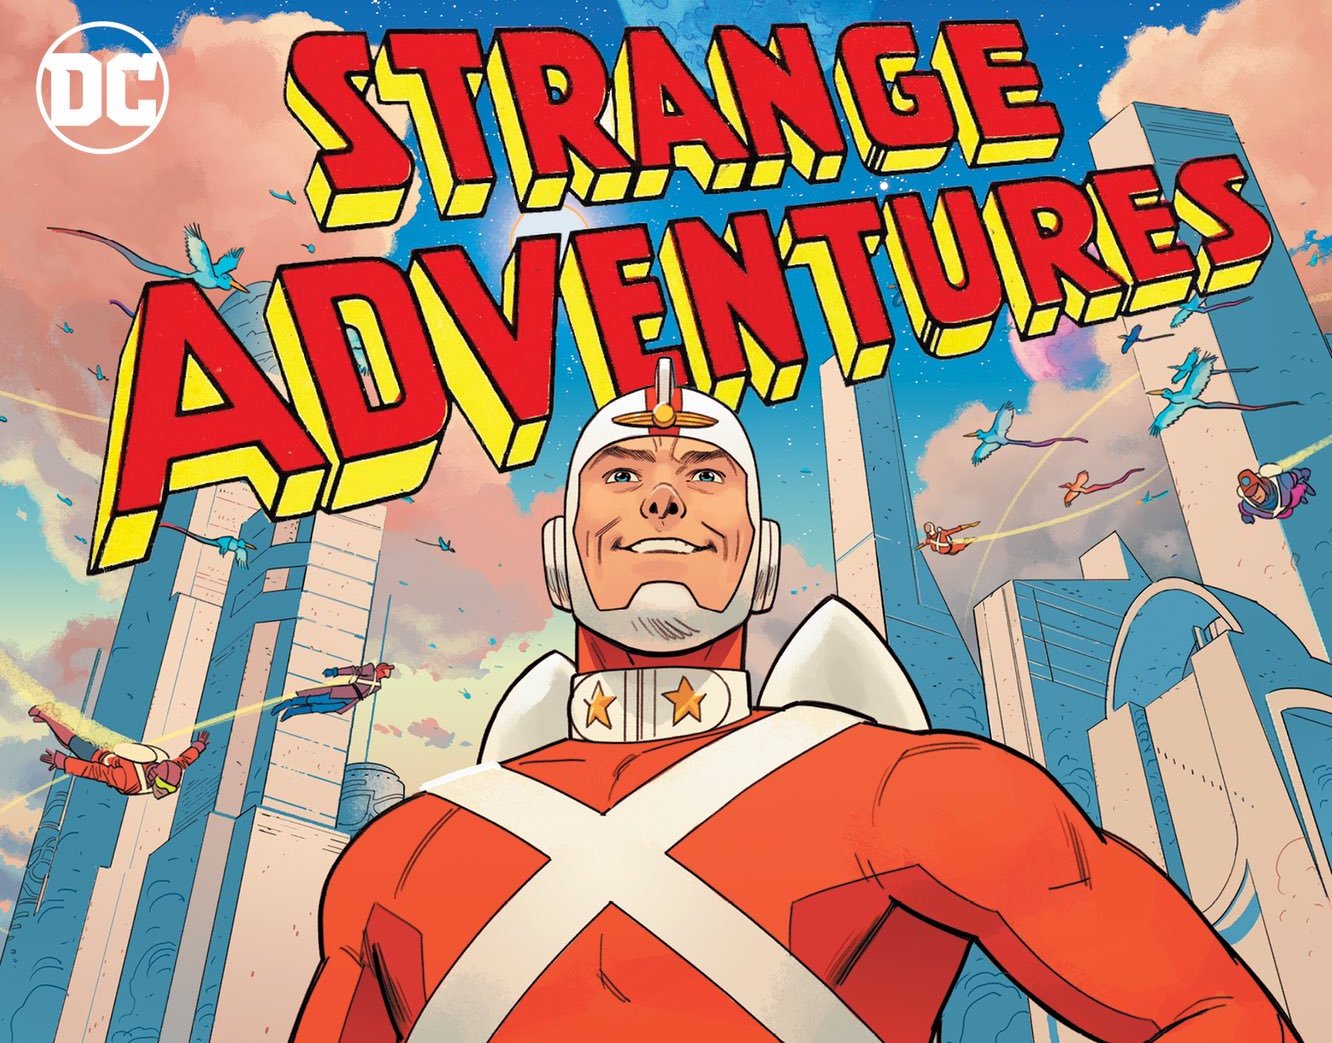 Tom King and Mitch Gerads go on 'Strange Adventures' in next project with Doc Shaner